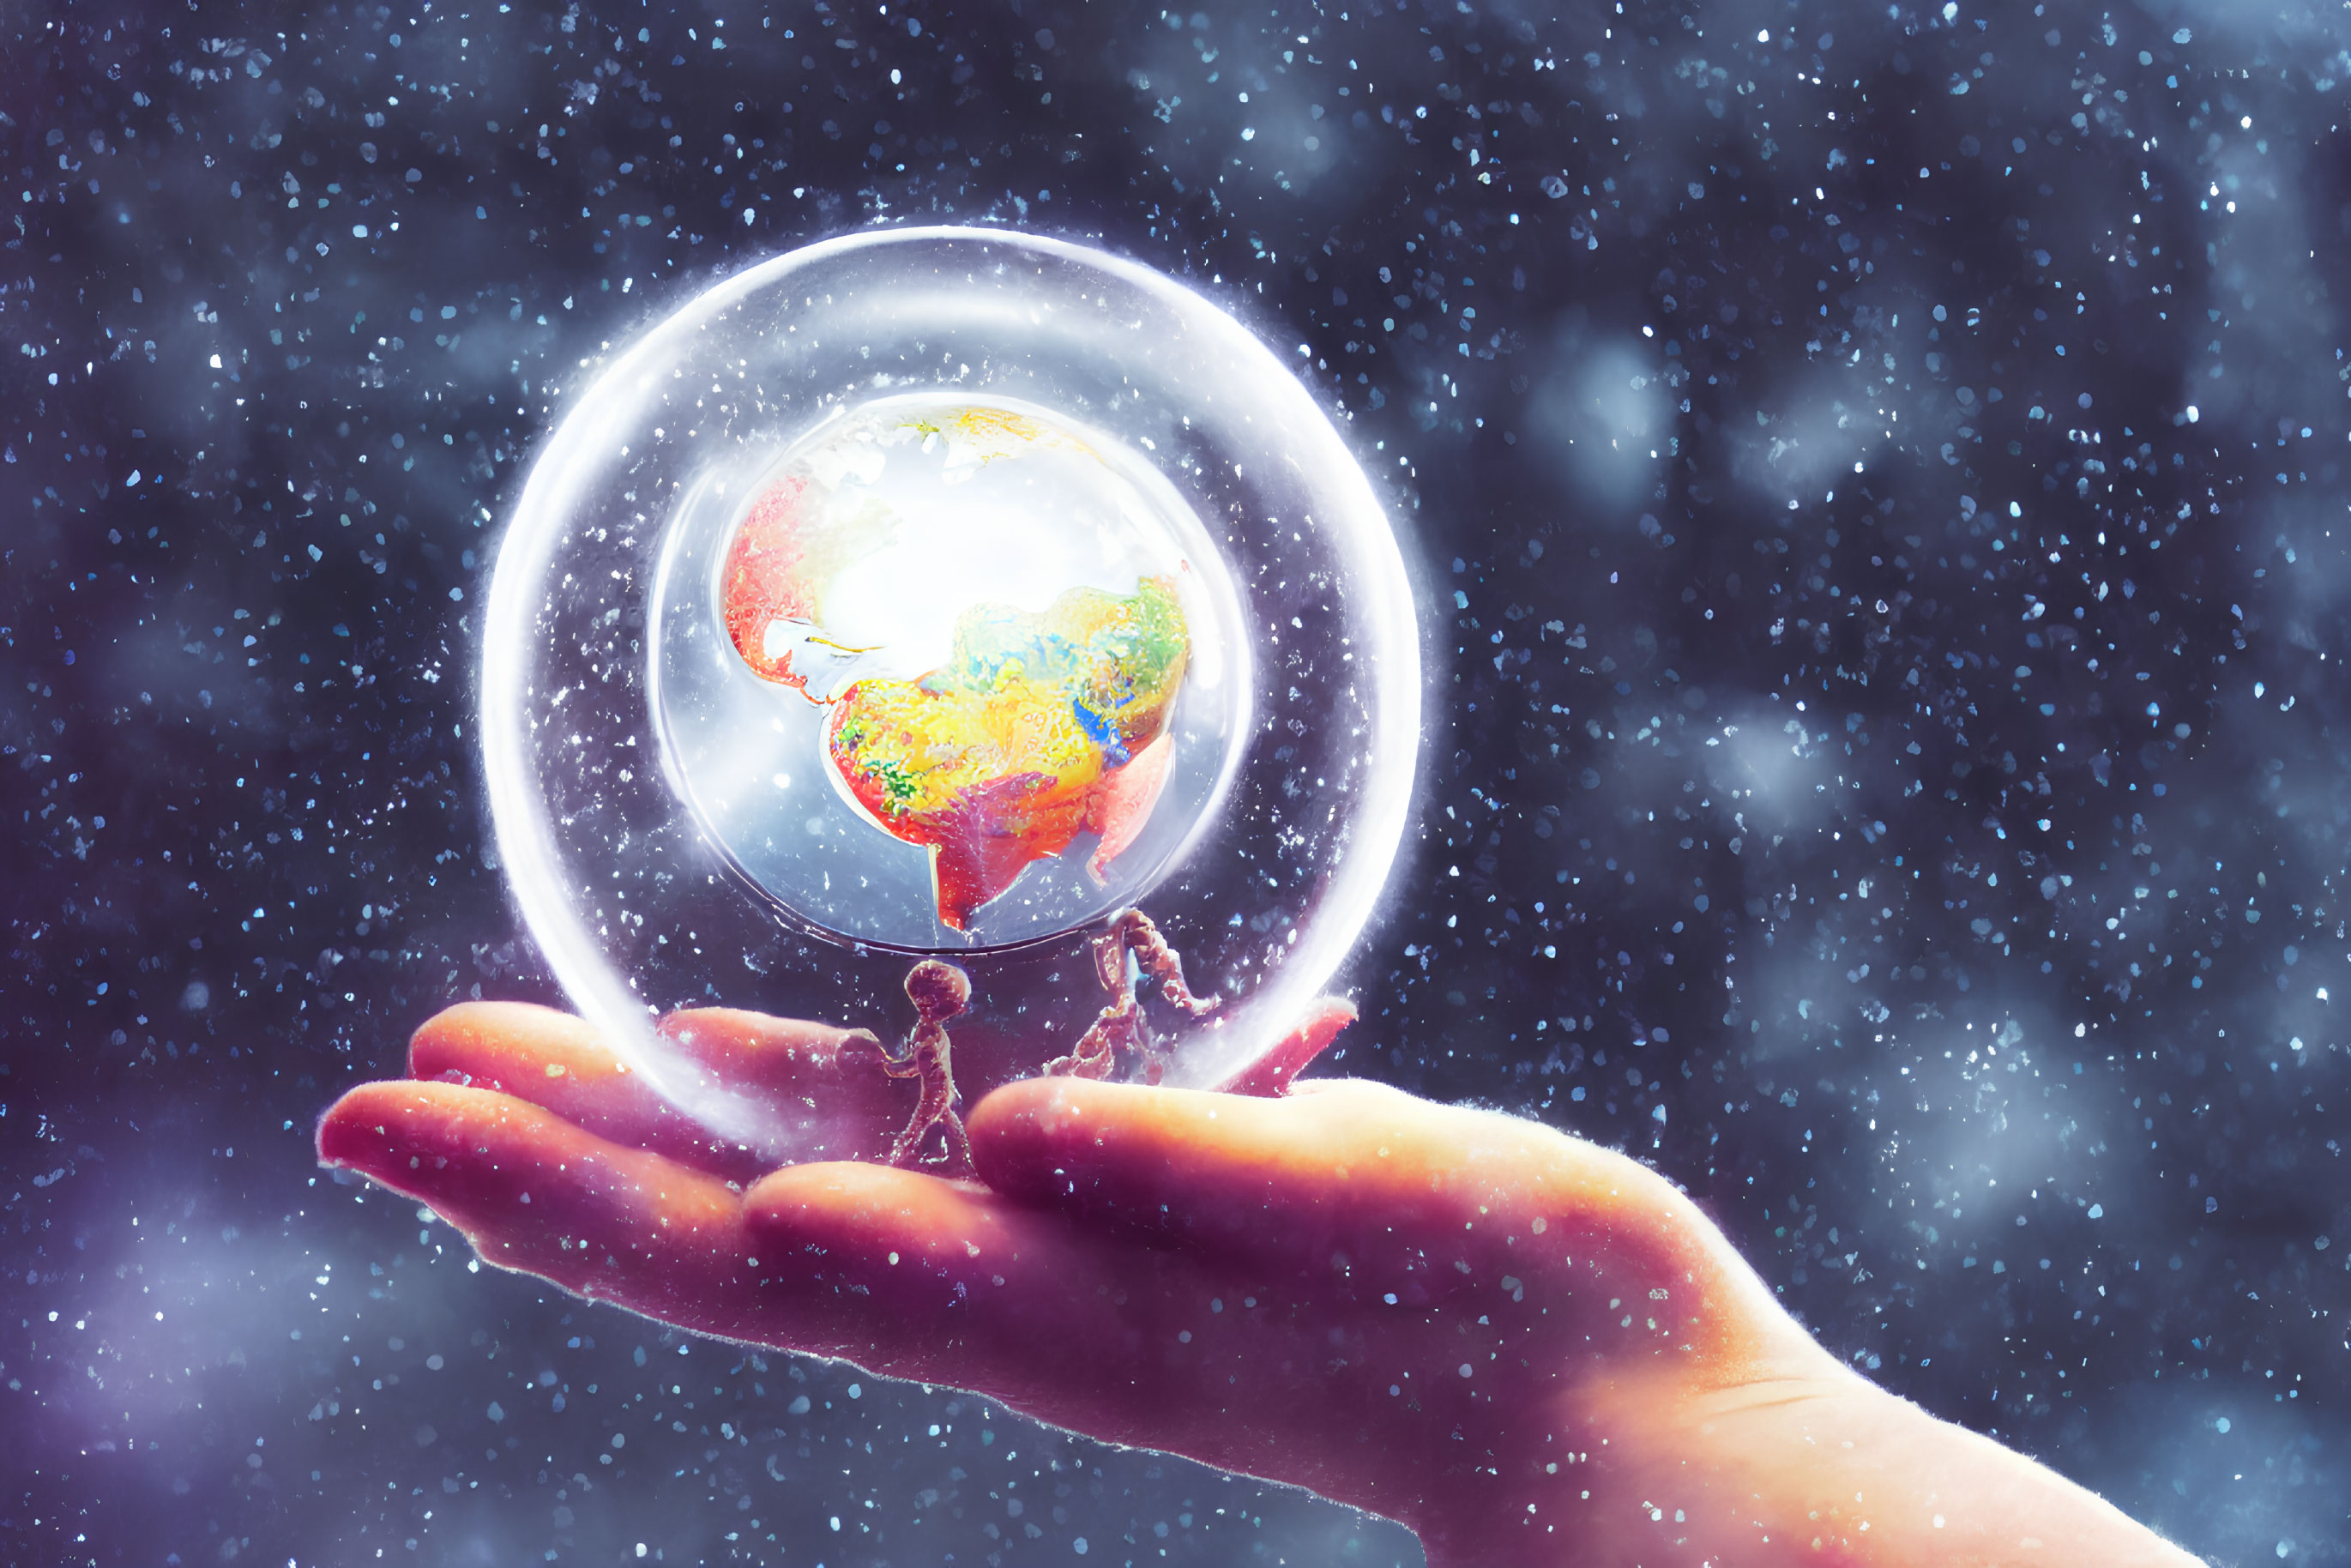 Hand holding glowing globe in translucent bubble against snowy backdrop